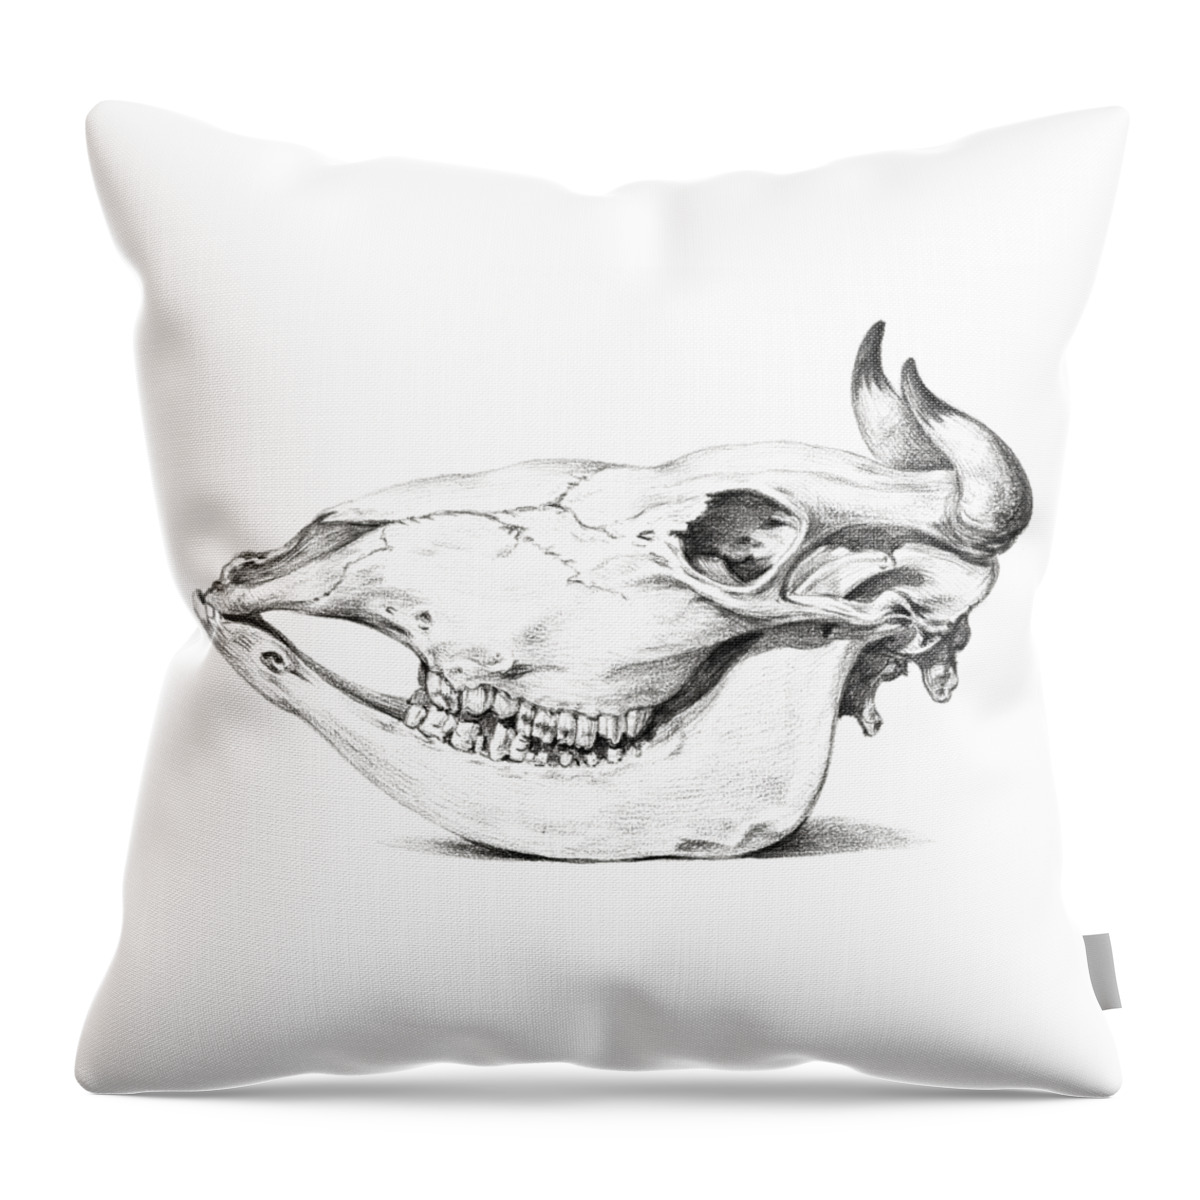 Skull Throw Pillow featuring the drawing Skull cattle horns vintage art old 1900 century hand painted illustration, skull by Mounir Khalfouf